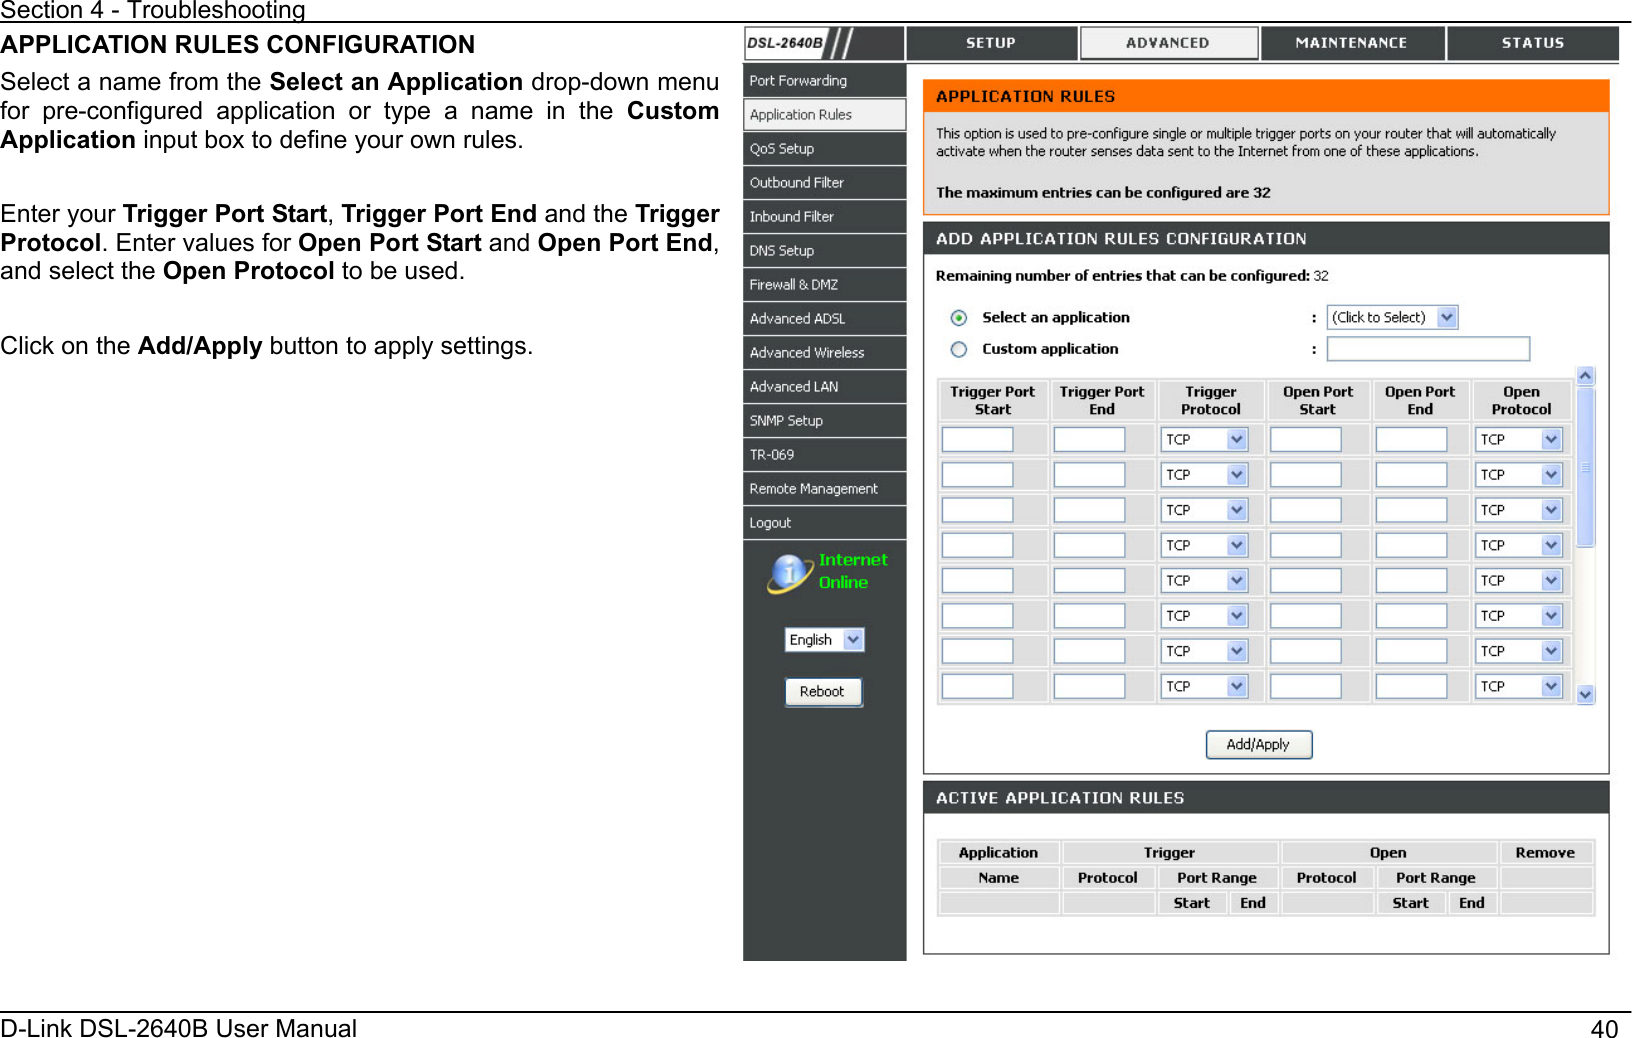 Section 4 - Troubleshooting D-Link DSL-2640B User Manual                                       40APPLICATION RULES CONFIGURATION Select a name from the Select an Application drop-down menu for pre-configured application or type a name in the Custom Application input box to define your own rules. Enter your Trigger Port Start,Trigger Port End and the Trigger Protocol. Enter values for Open Port Start and Open Port End,and select the Open Protocol to be used. Click on the Add/Apply button to apply settings. 